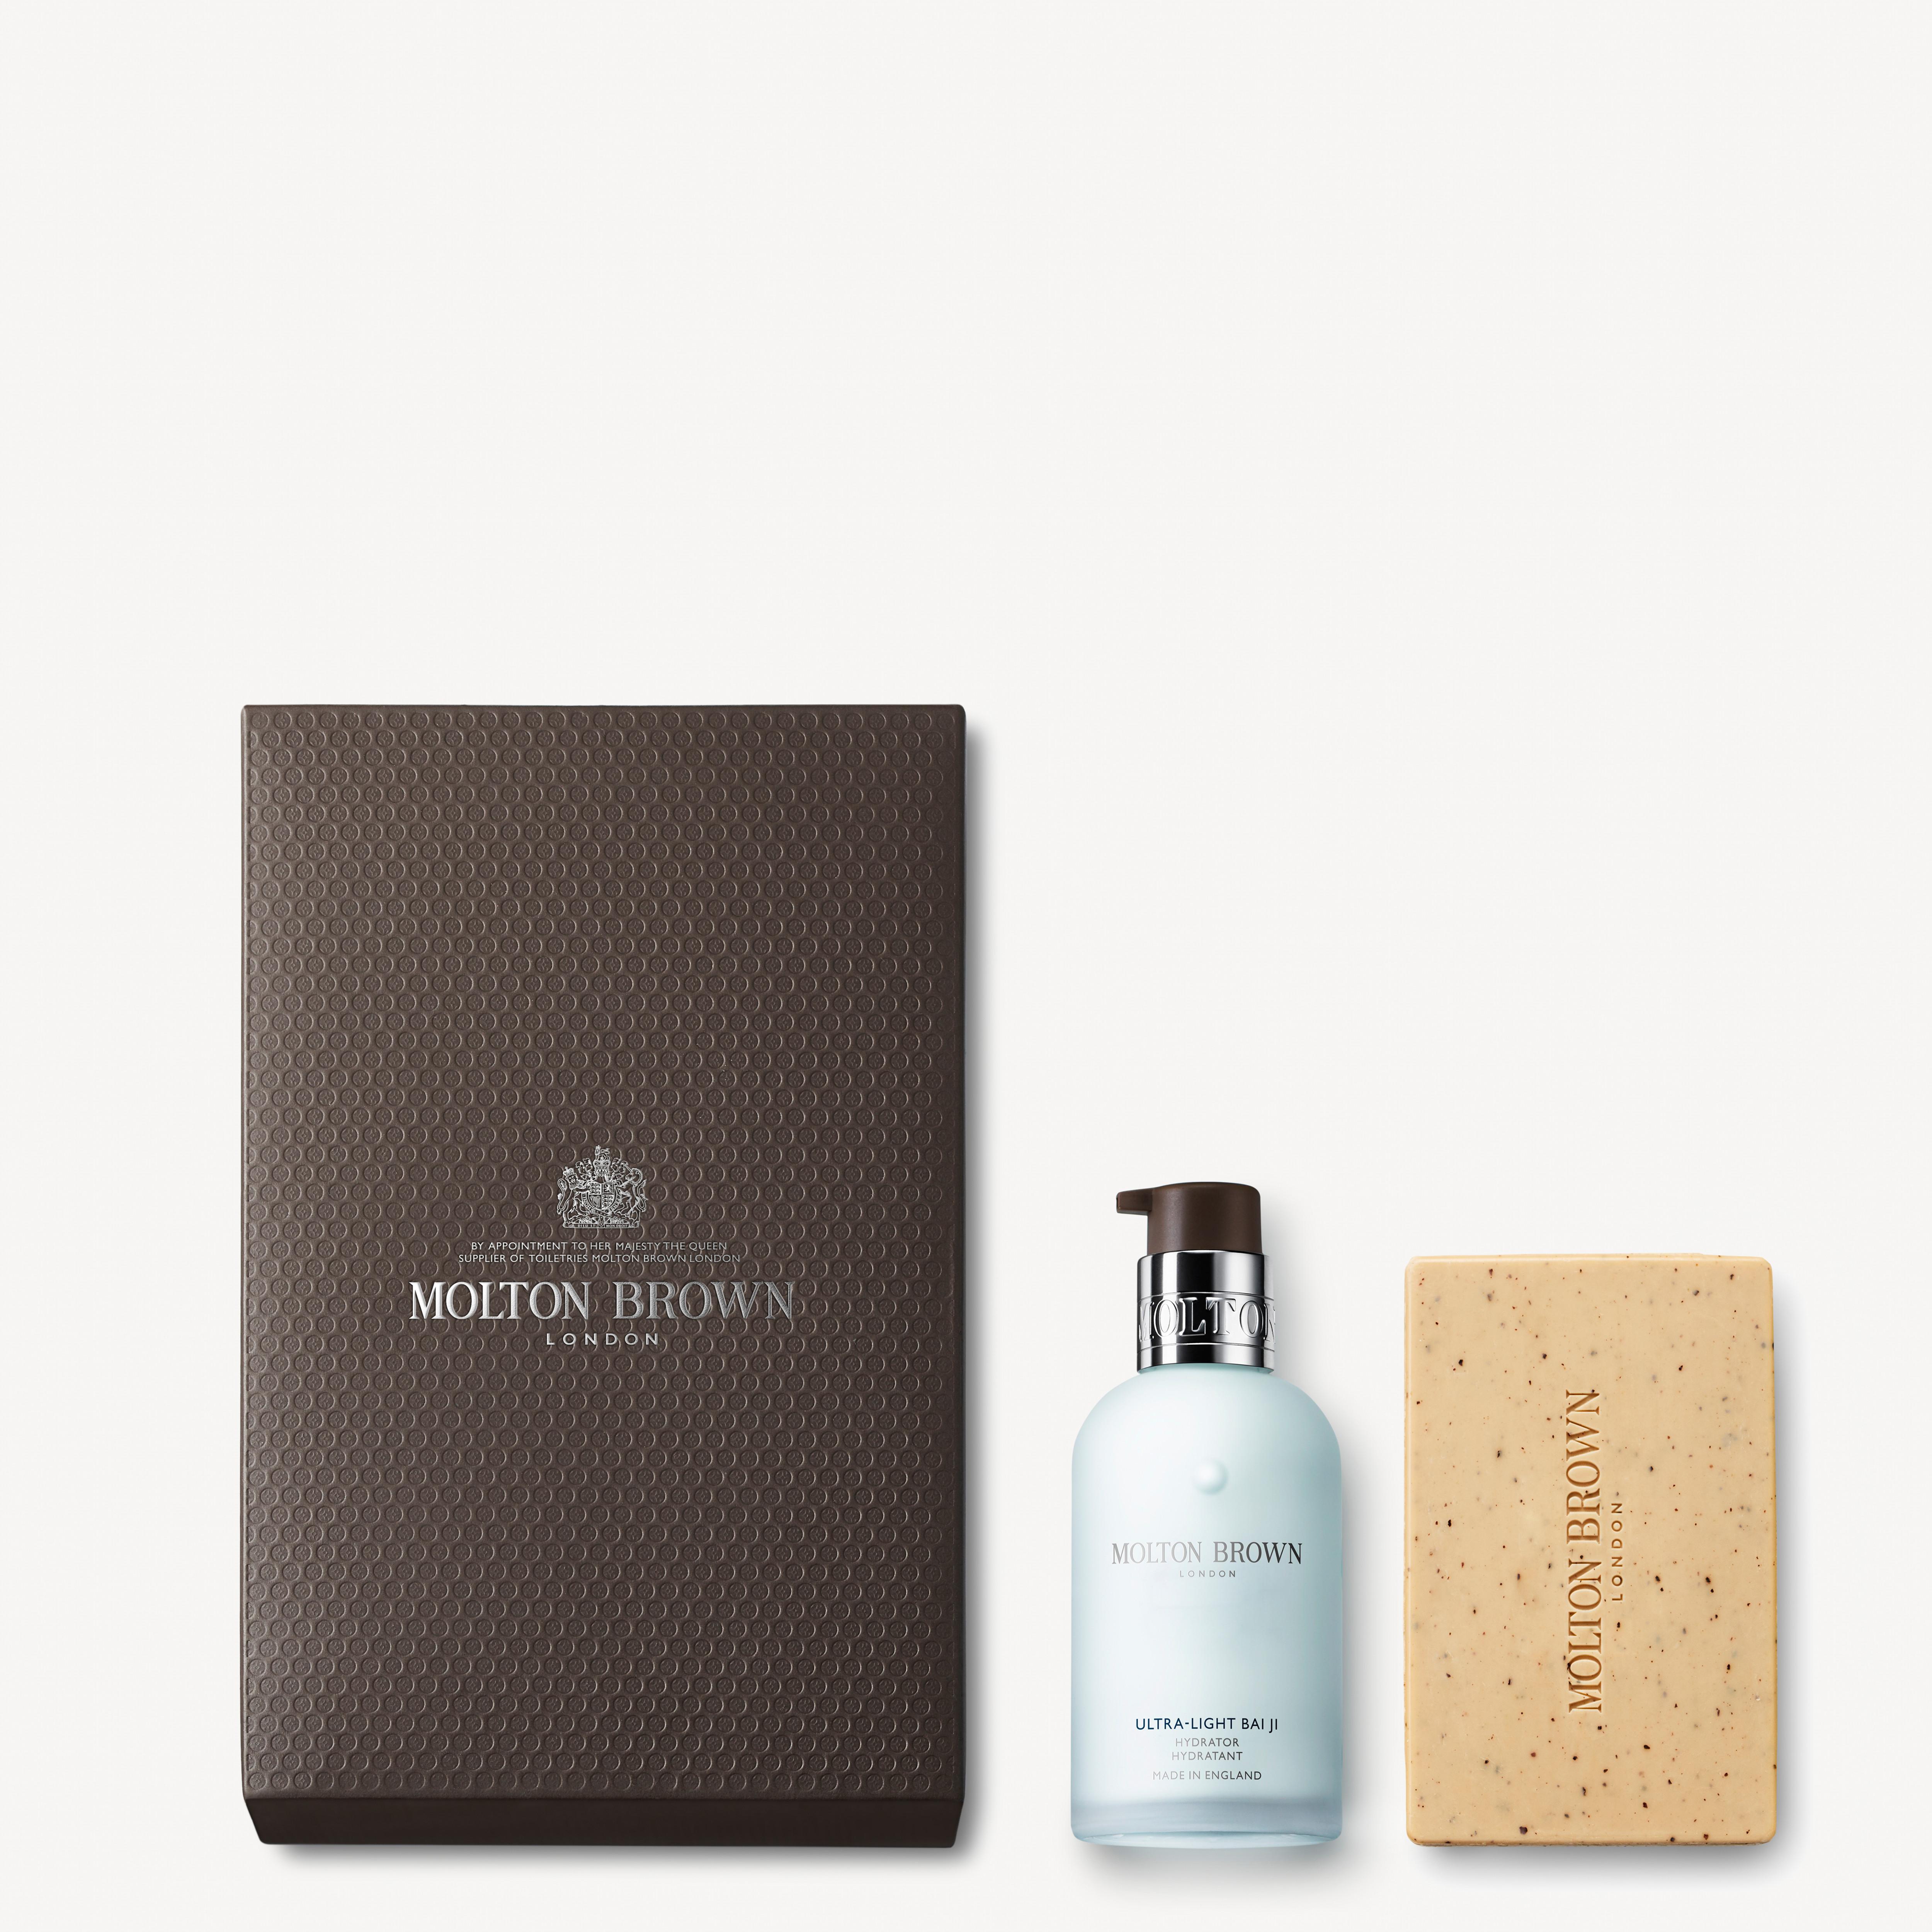 Molton Brown Men’s Grooming & Body Care Gift Set